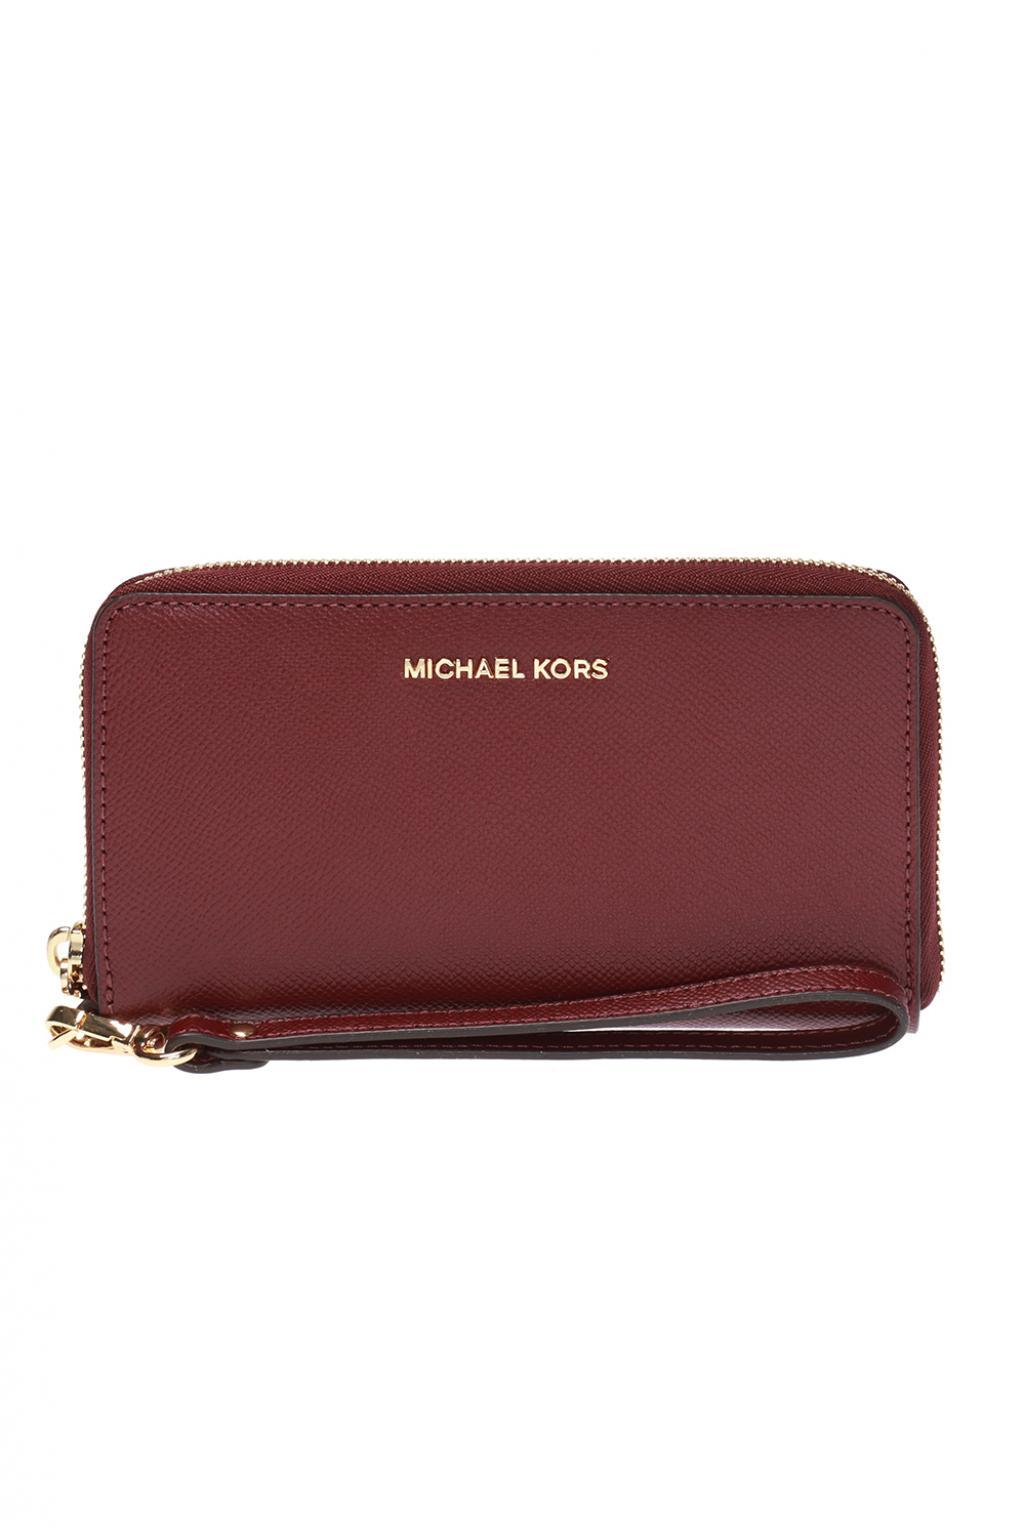 Michael Kors Wallet With A Wrist Strap | Lyst